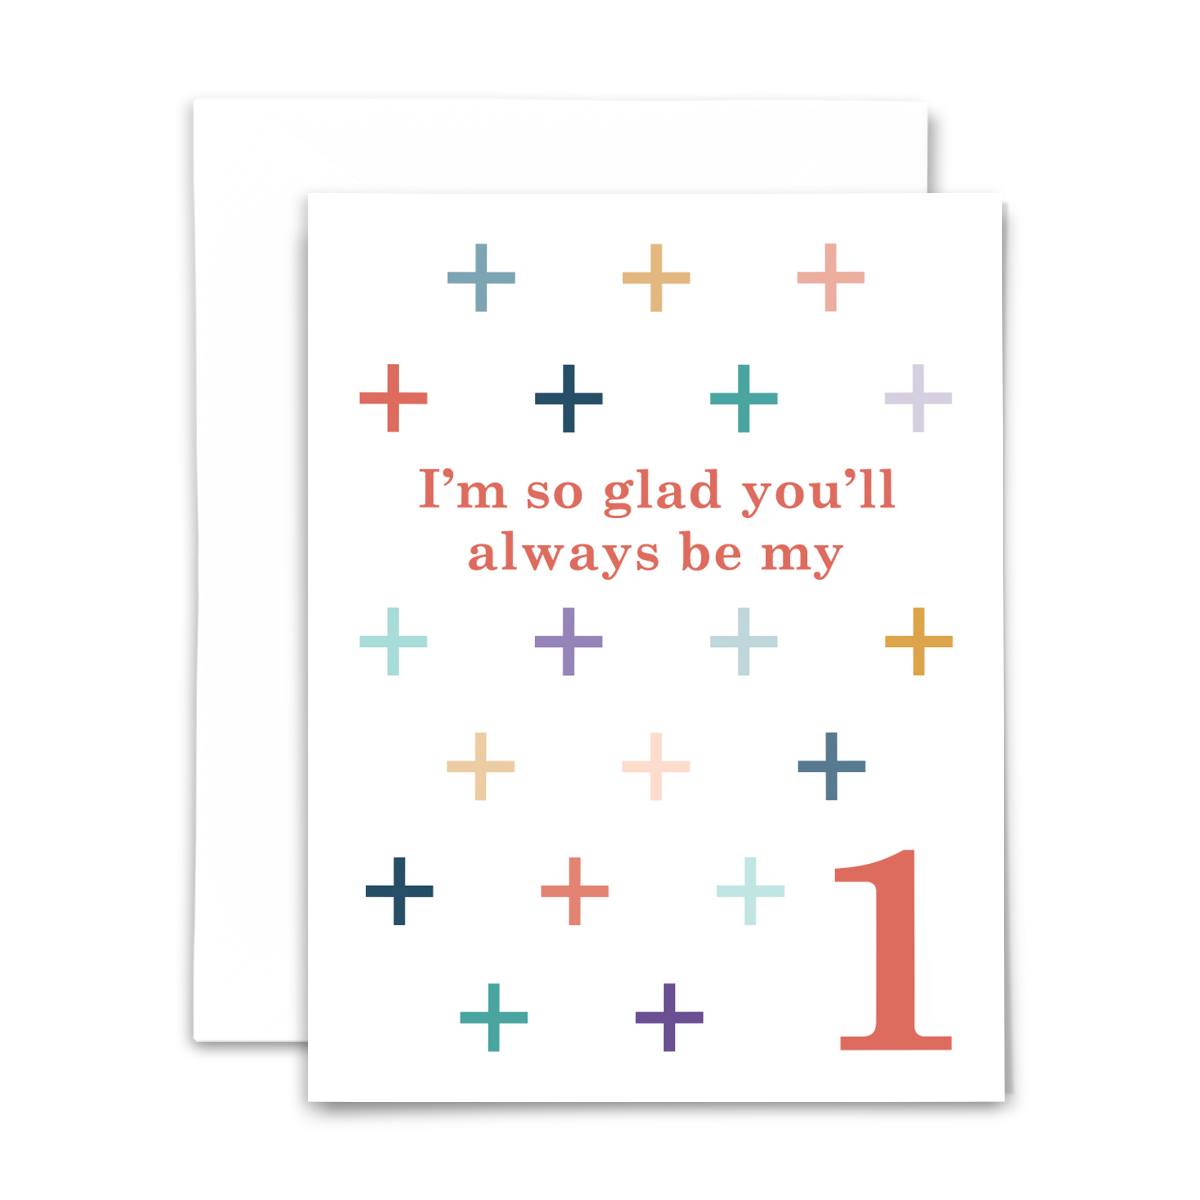 "I'm so glad you'll always be my +1" greeting card; coral serif font surrounded by grid of + in various colors (blues, teals, golds, corals, pinks, purples) on white background; blank interior with white envelope